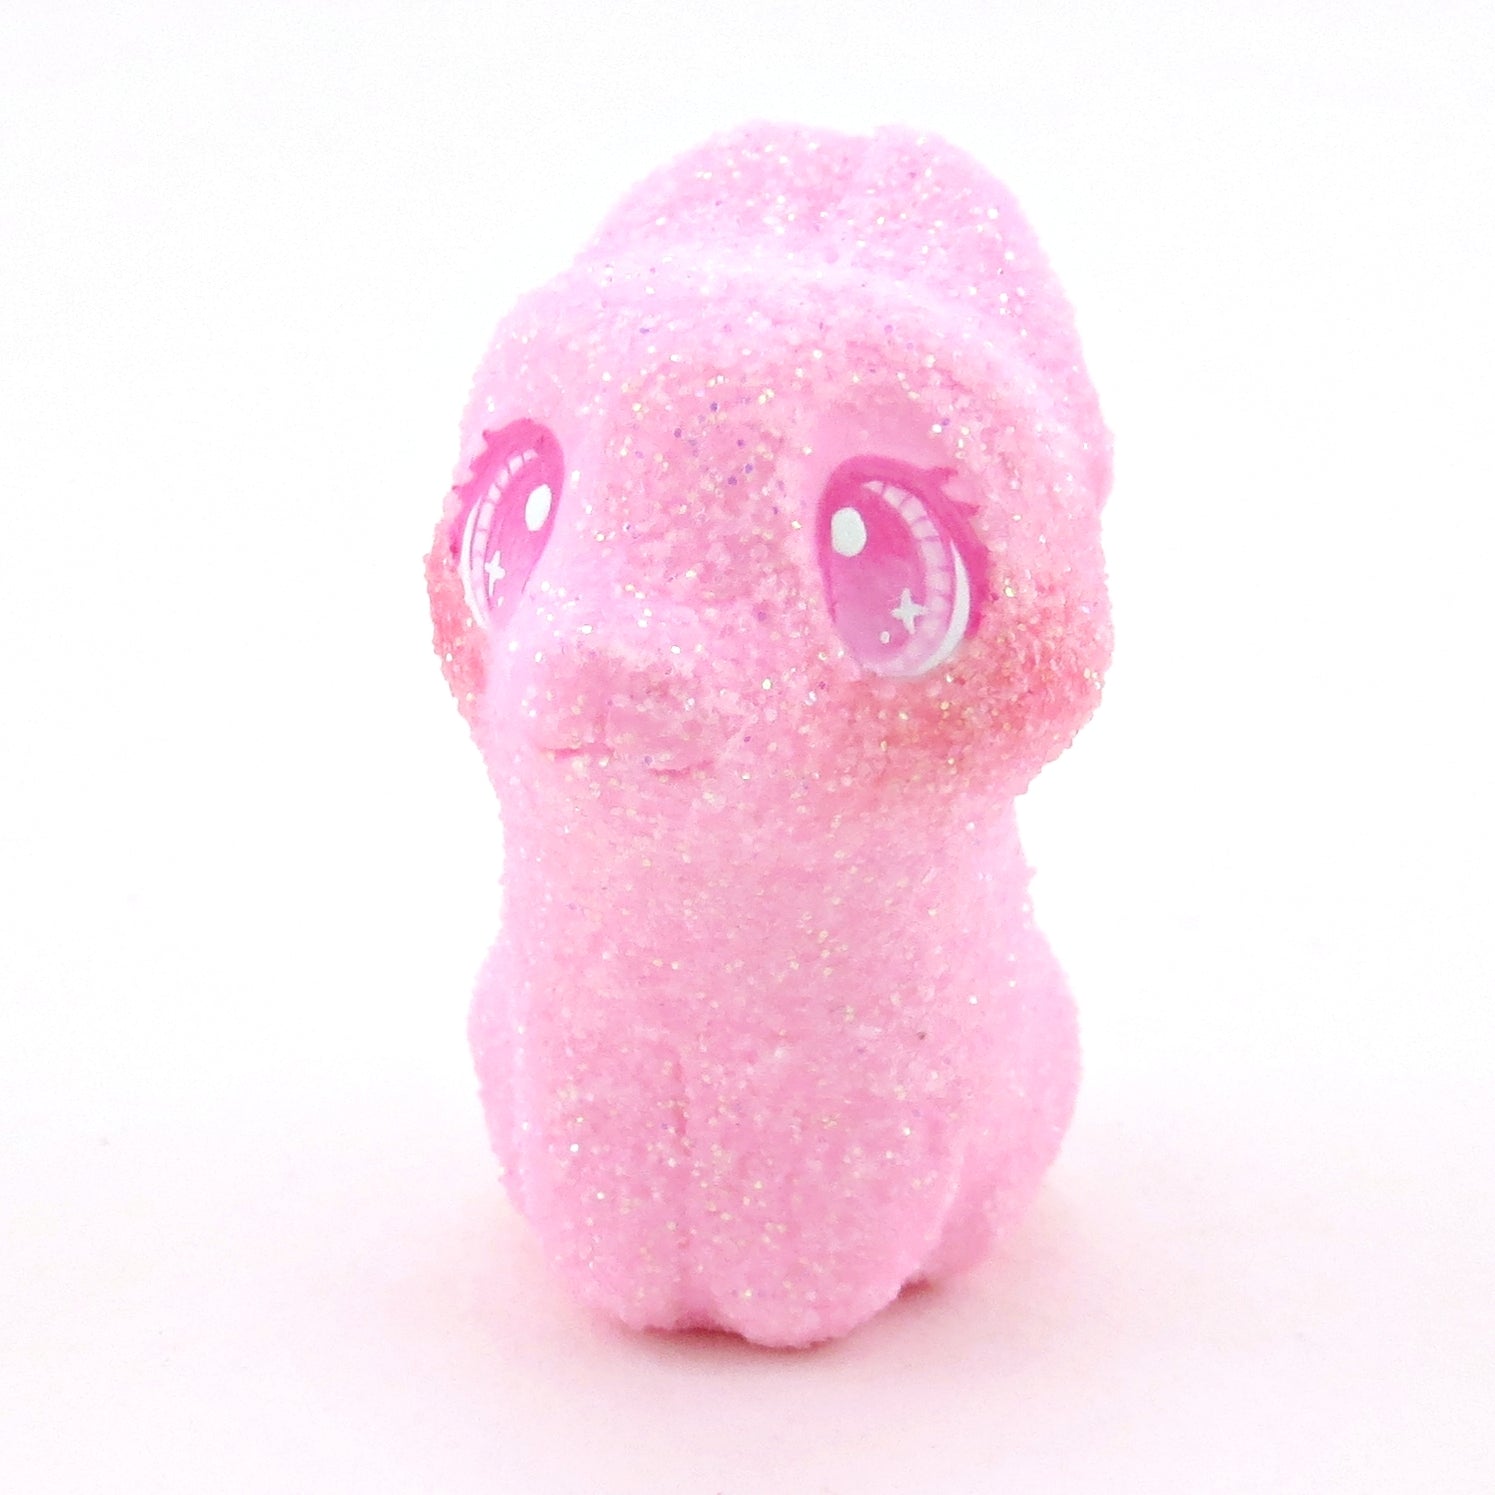 Glitter "Marshmallow" Pink Bunny Figurine - Polymer Clay Easter Animal Collection